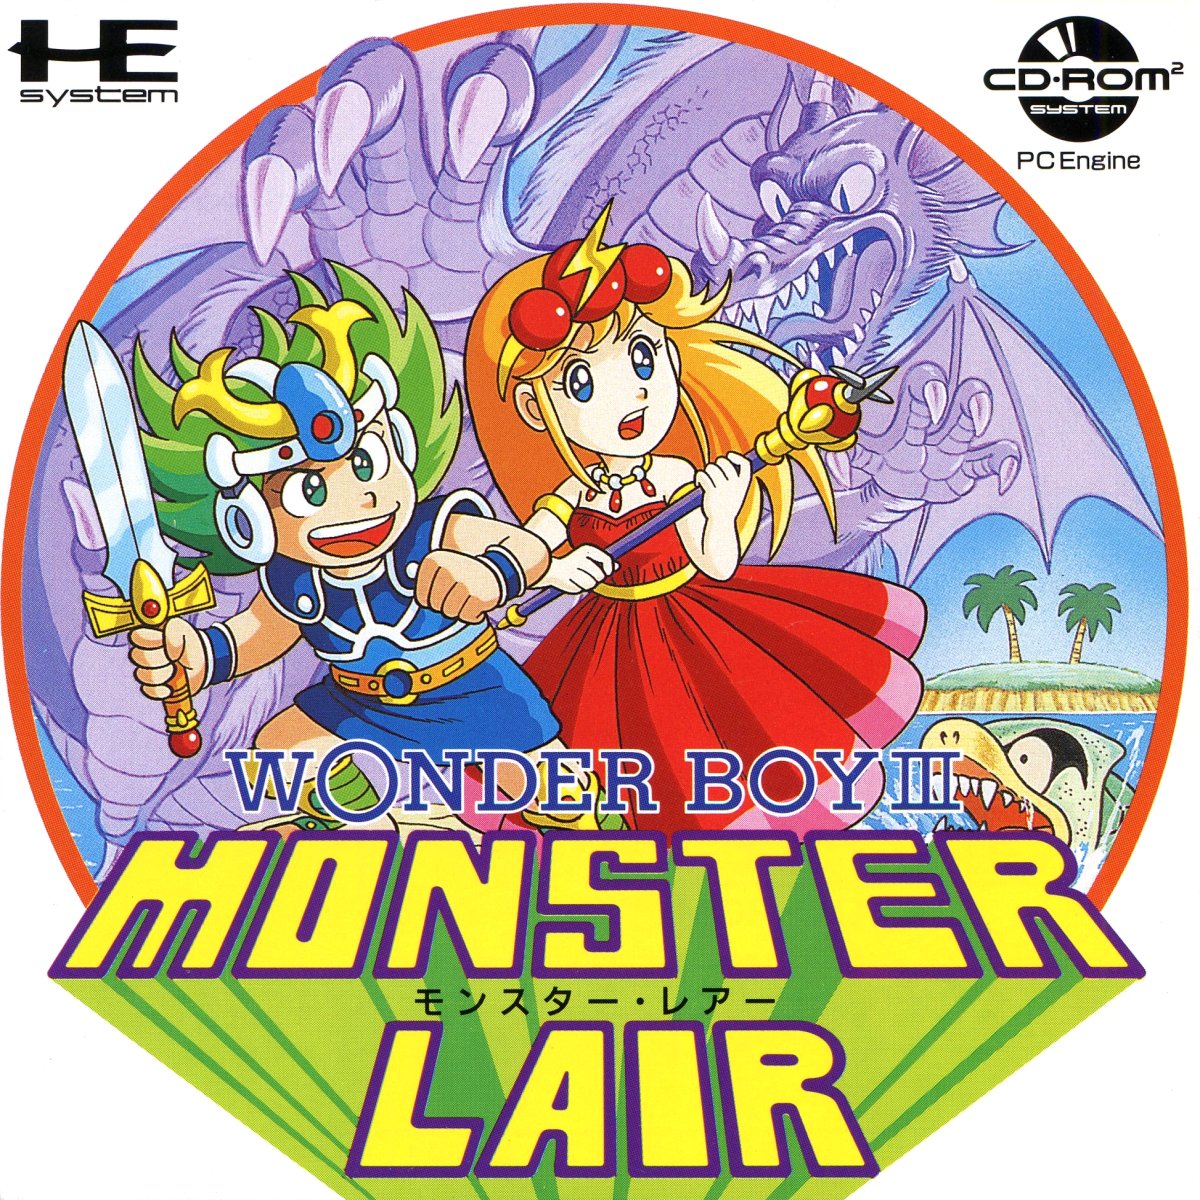 image-wonder-boy-iii-pce-jpg-v-s-recommended-games-wiki-fandom-powered-by-wikia